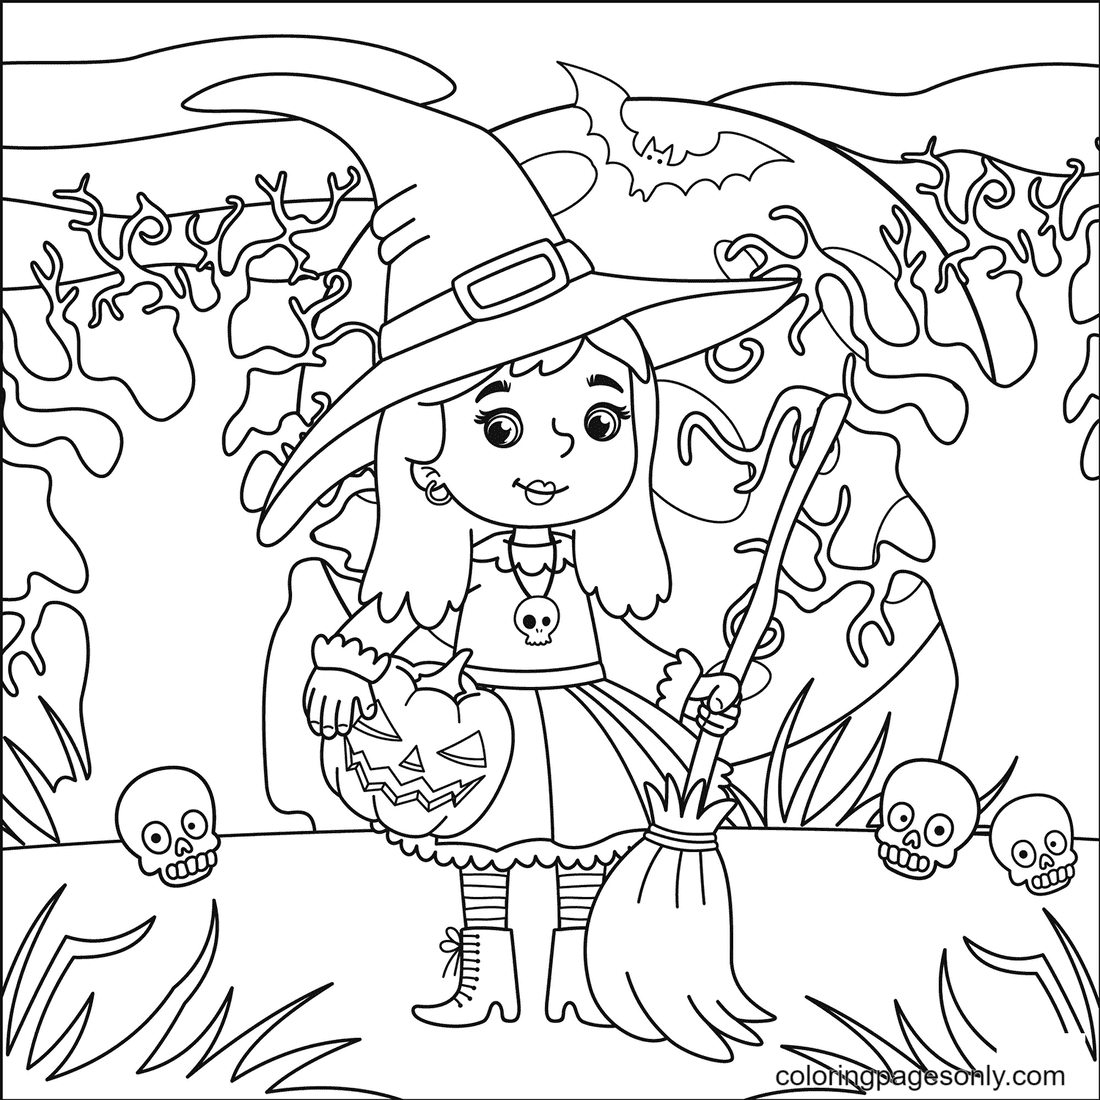 Cute Little Witch holding a Broom and a Pumpkin Lamp from Halloween Witch